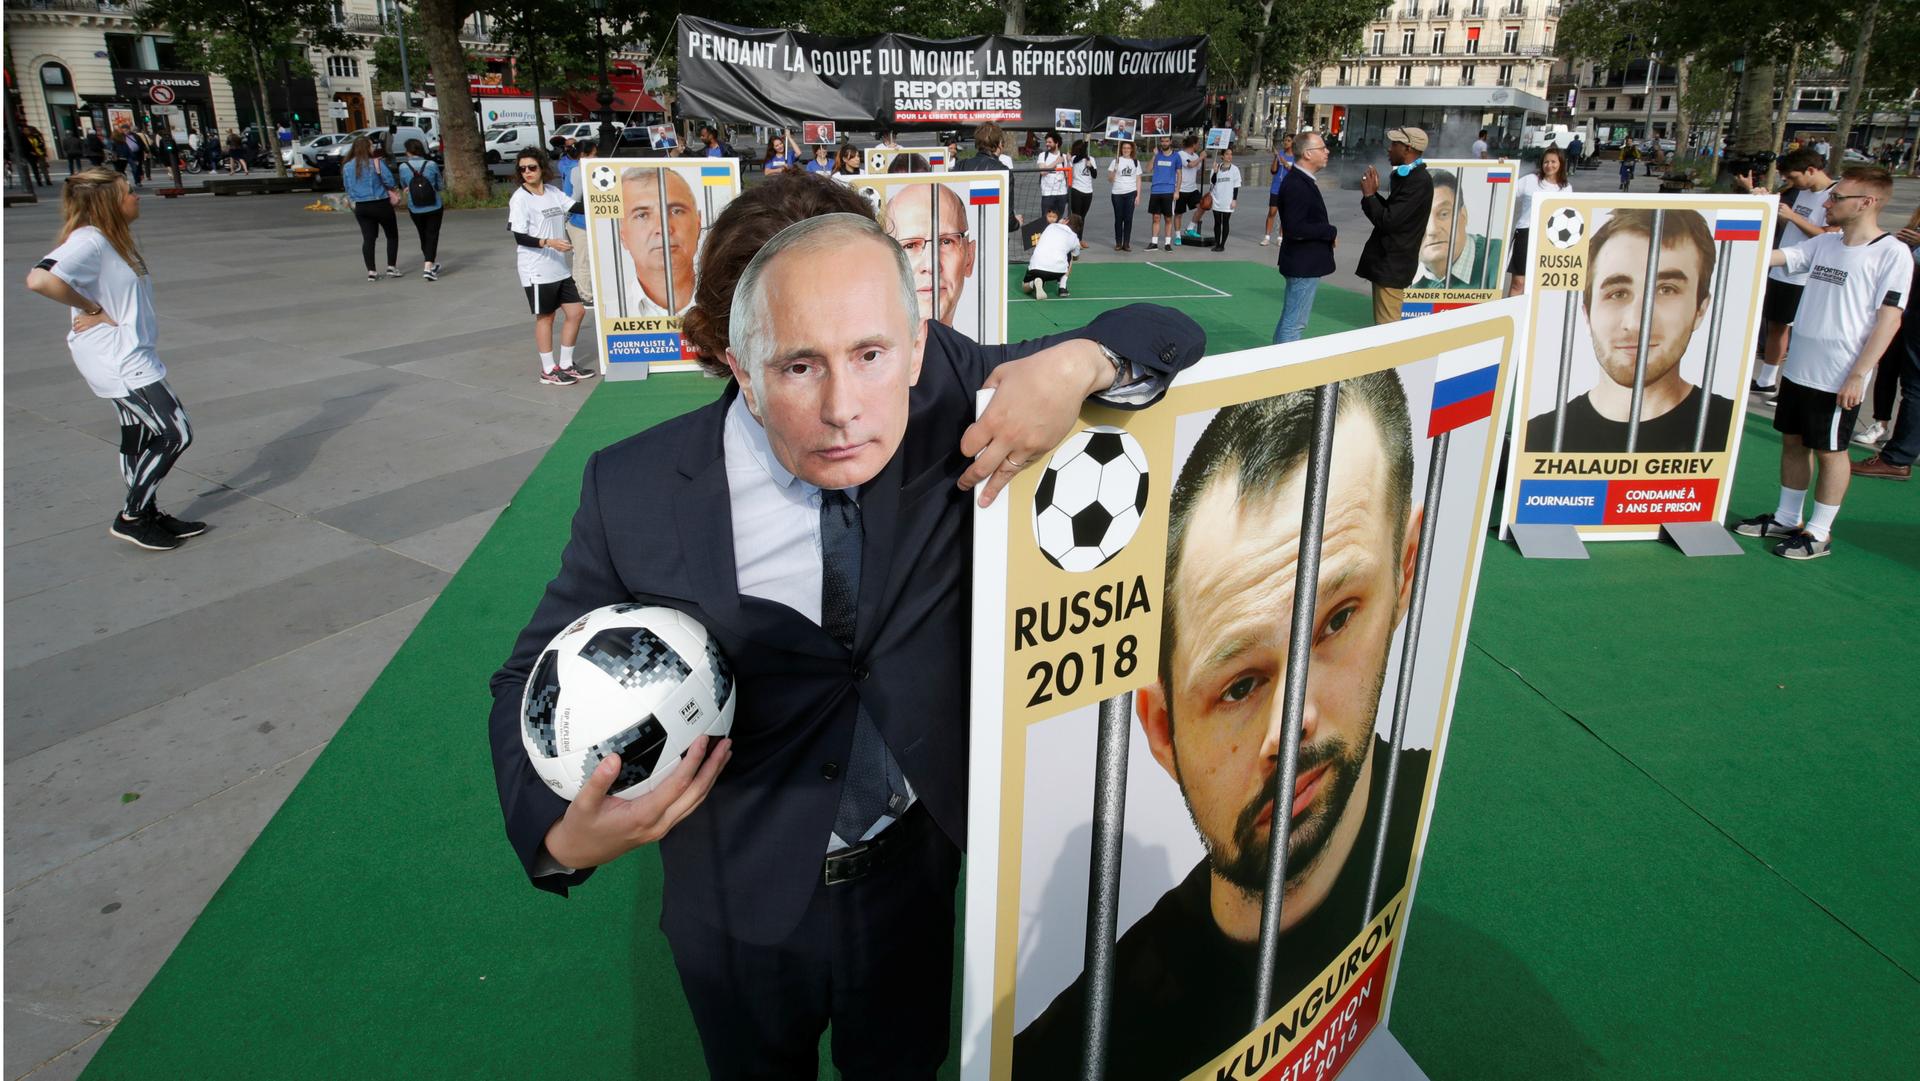 An activist with Reporter Without Borders, wearing a mask depicting Russian President Vladimir Putin, stands next to a giant portrait of imprisoned Russian journalist Alexei Kungurov on the Place de la Republique